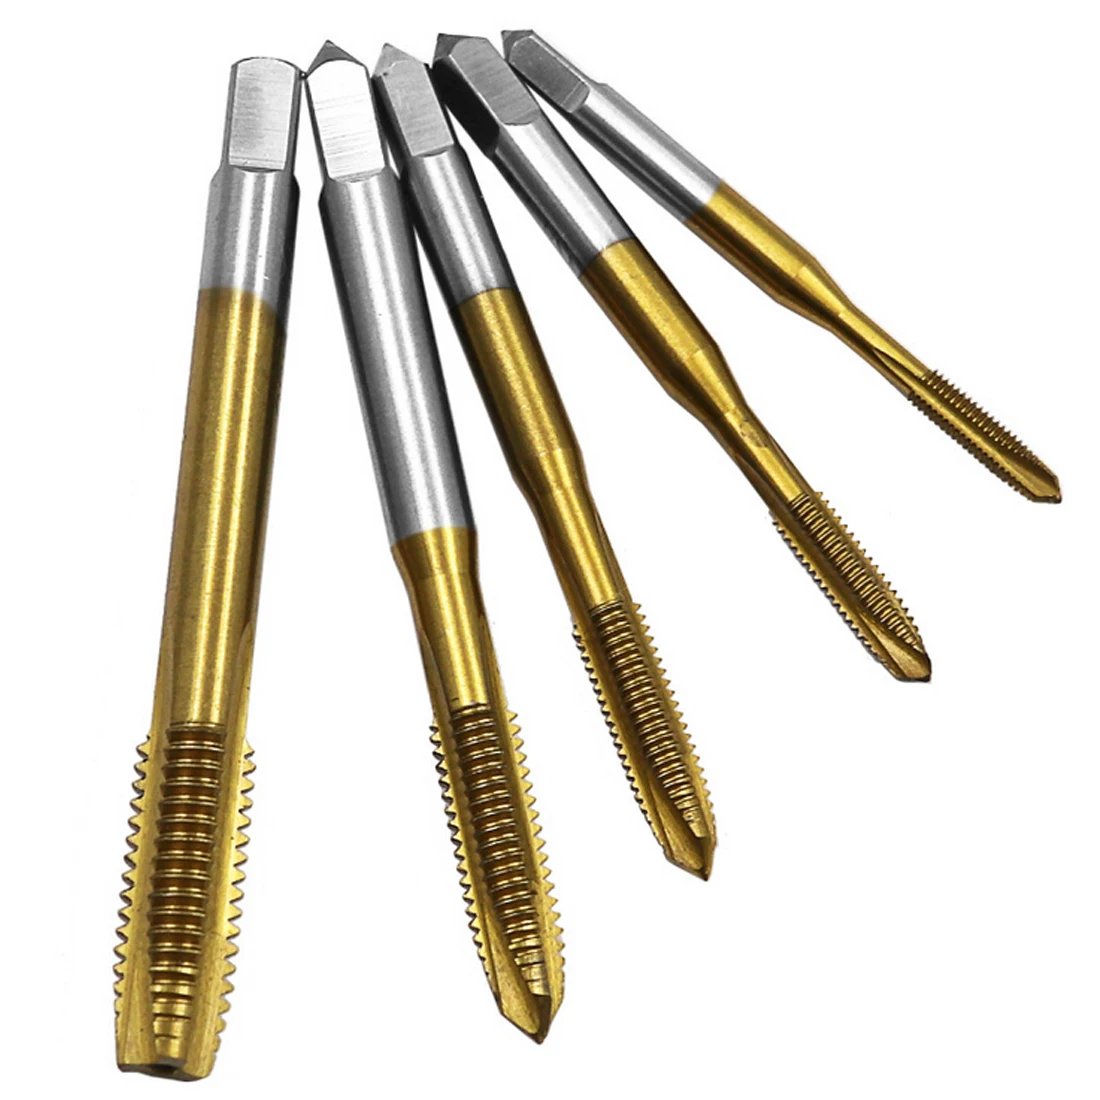 

Titanium Coated Thread Taping Drill Metric Hss Spiral Fluted Machine Screw Tap Spiral Pointed Mahcine Taps Metal M3 M4 M5 M6 M8